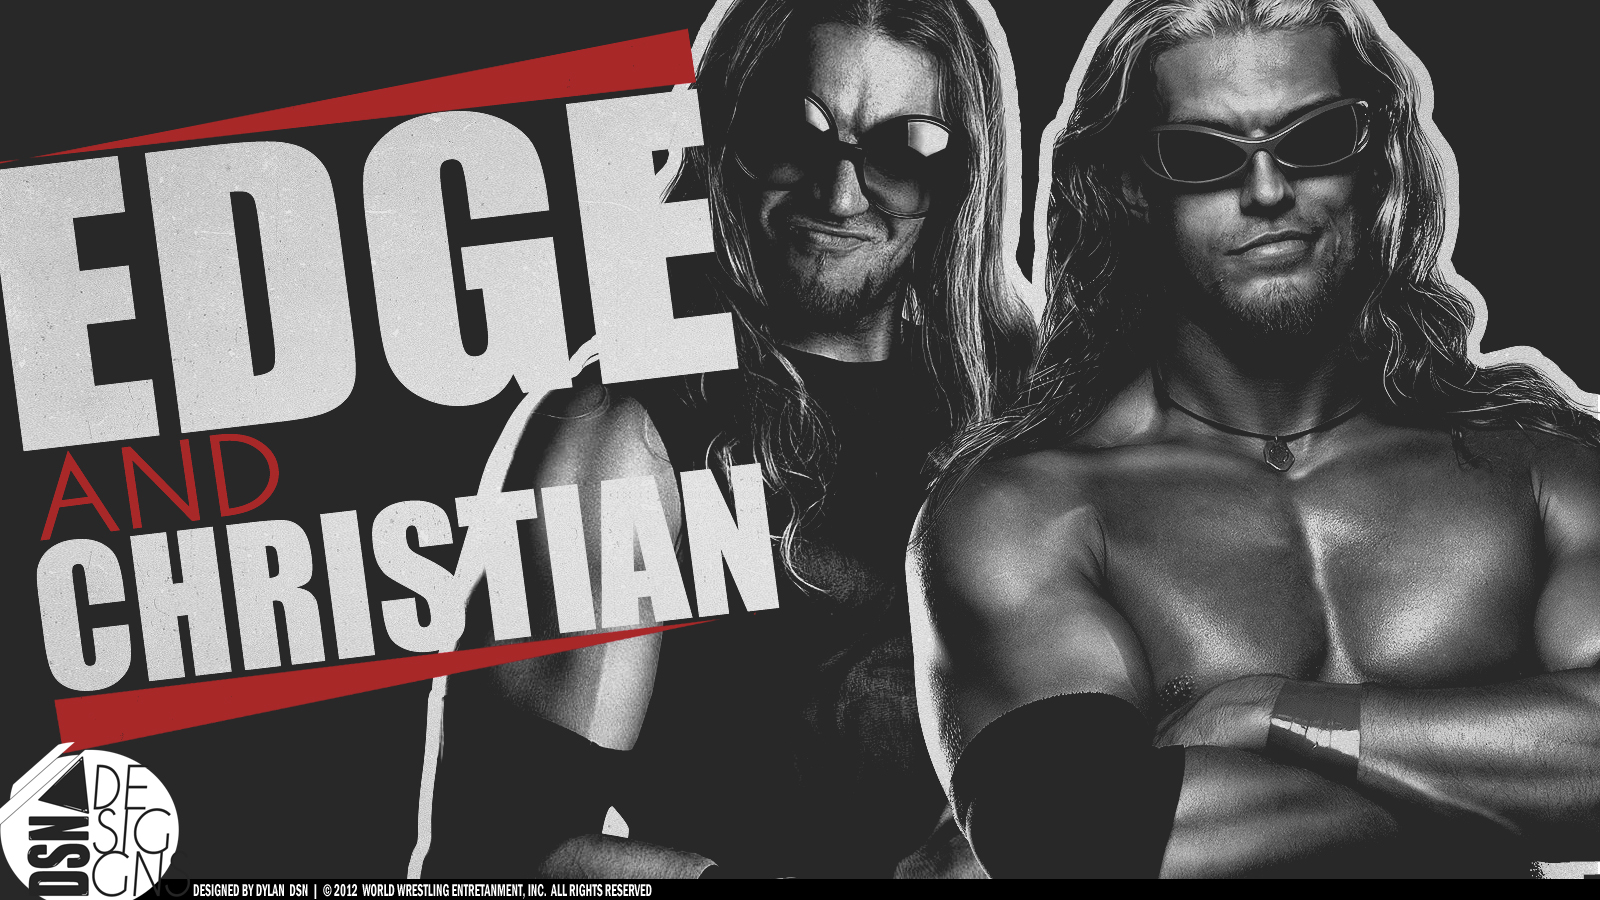 edge_and_christian___wallpaper_by_findmyart-d4oo2l0